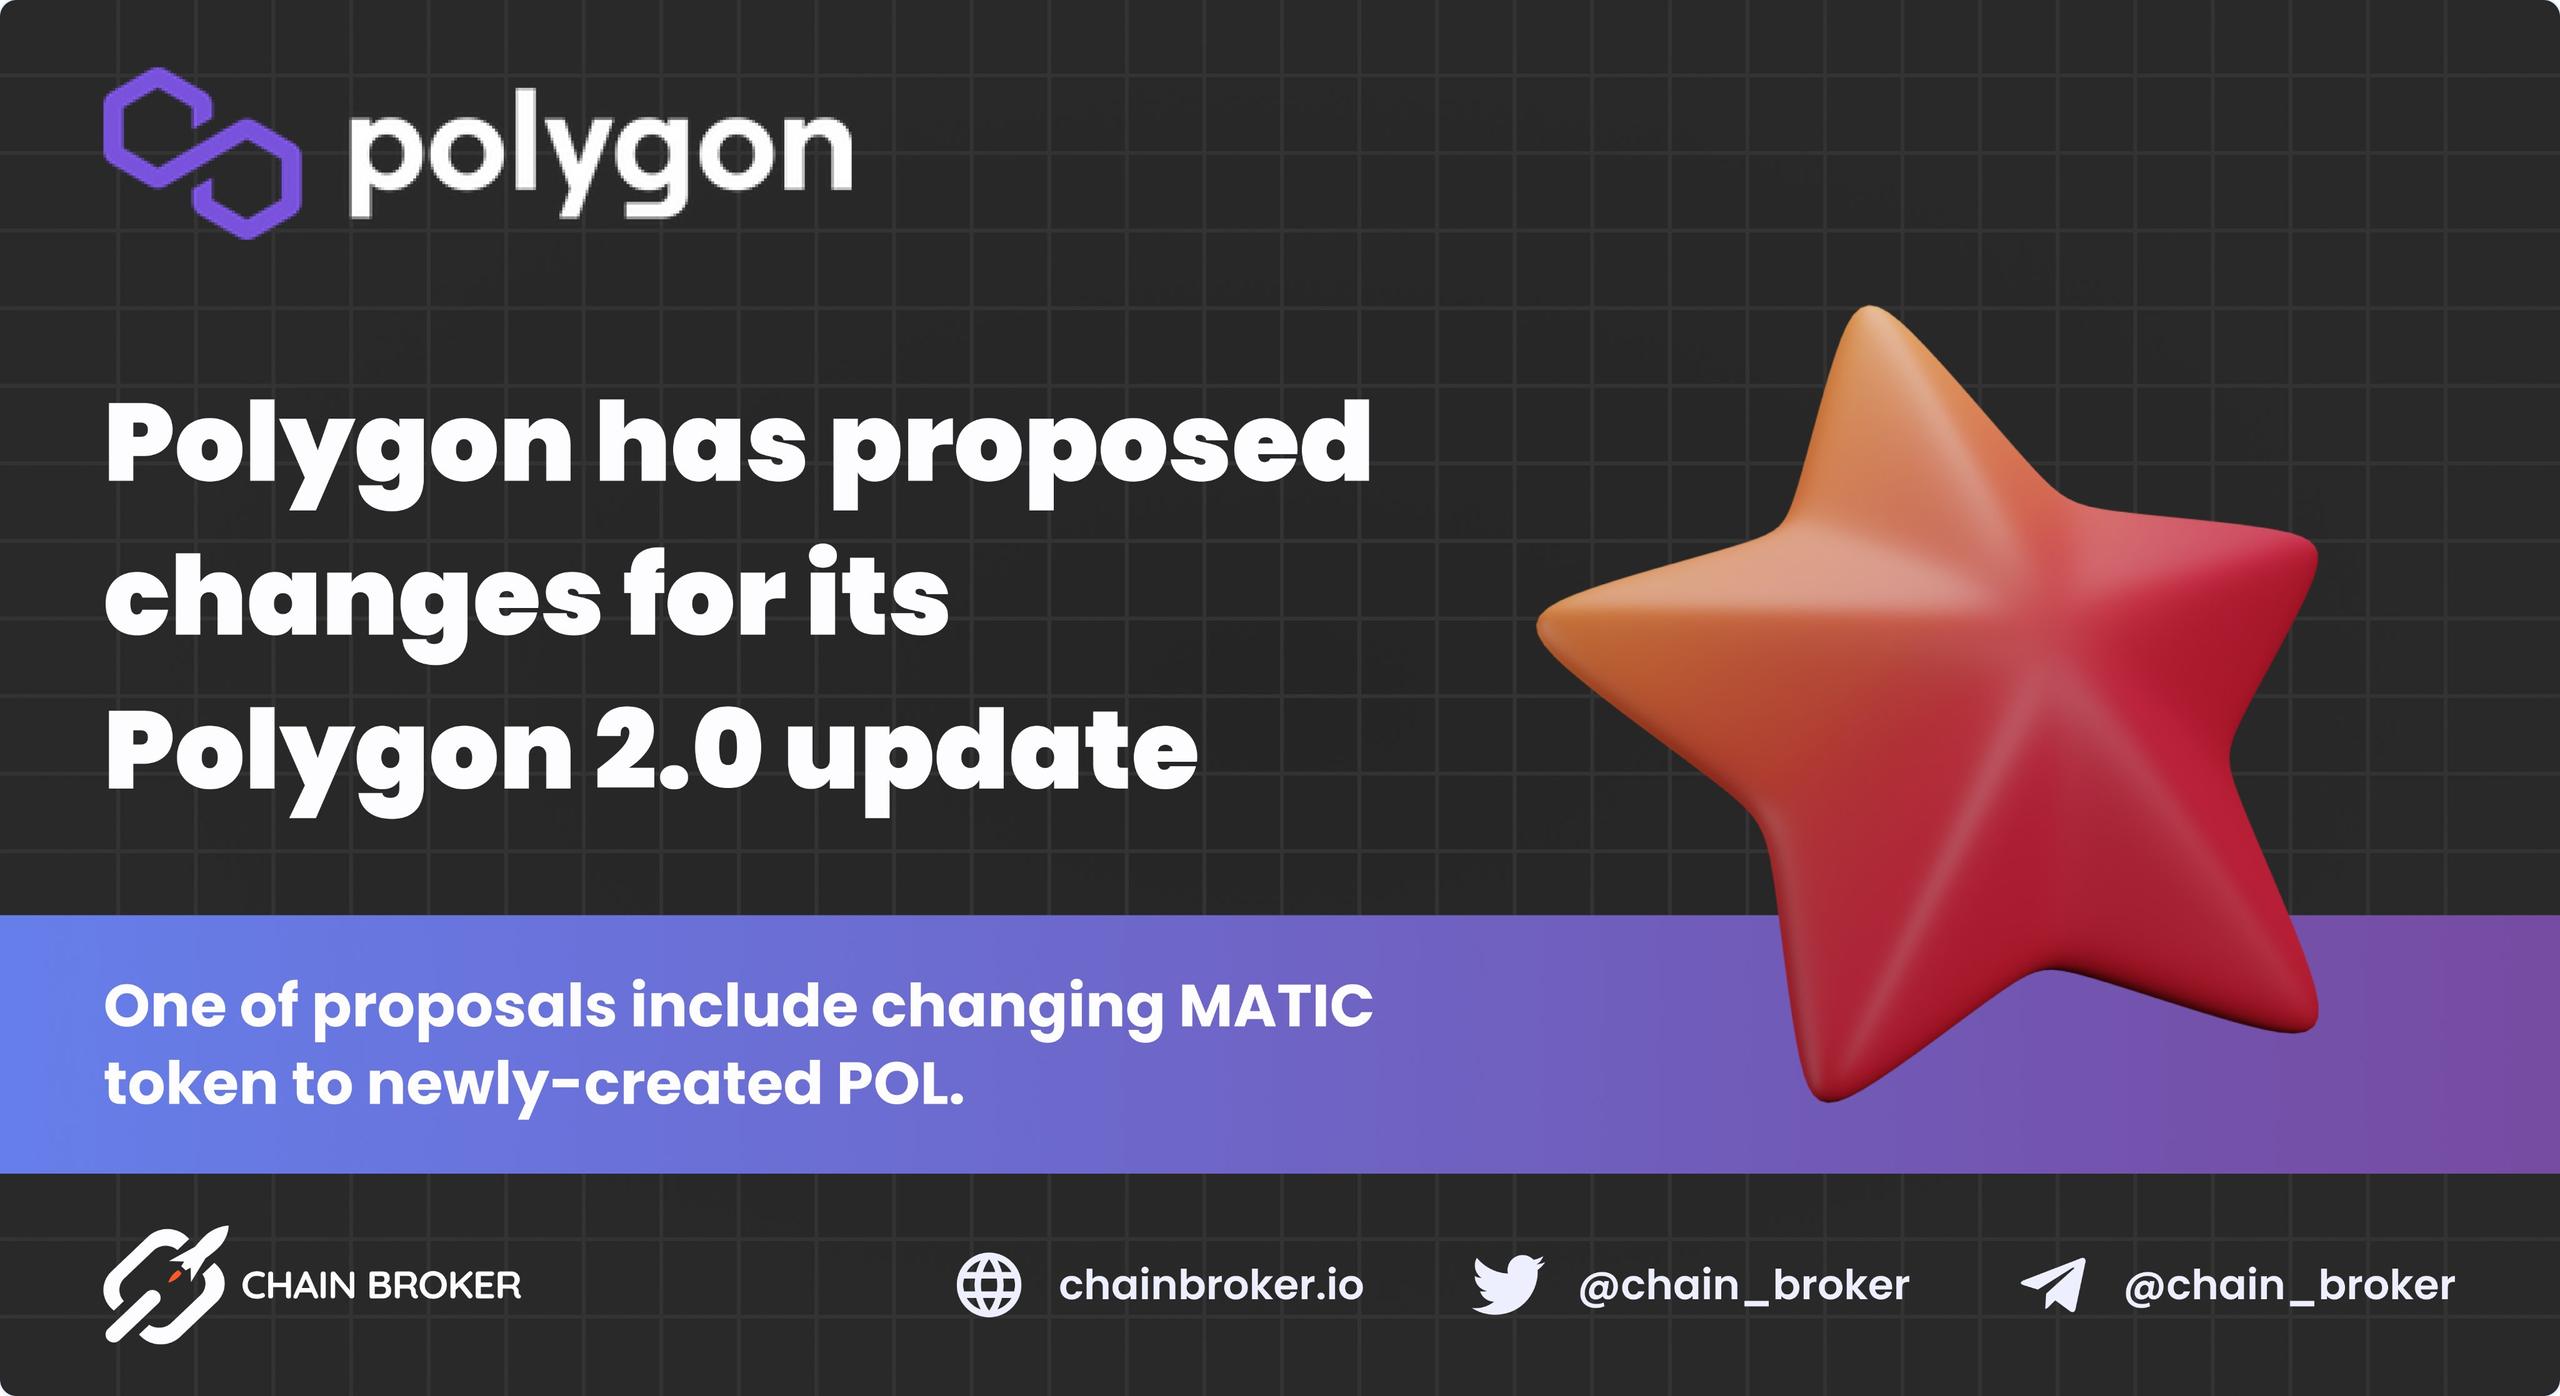 Polygon has proposed changes for its Polygon 2.0 update